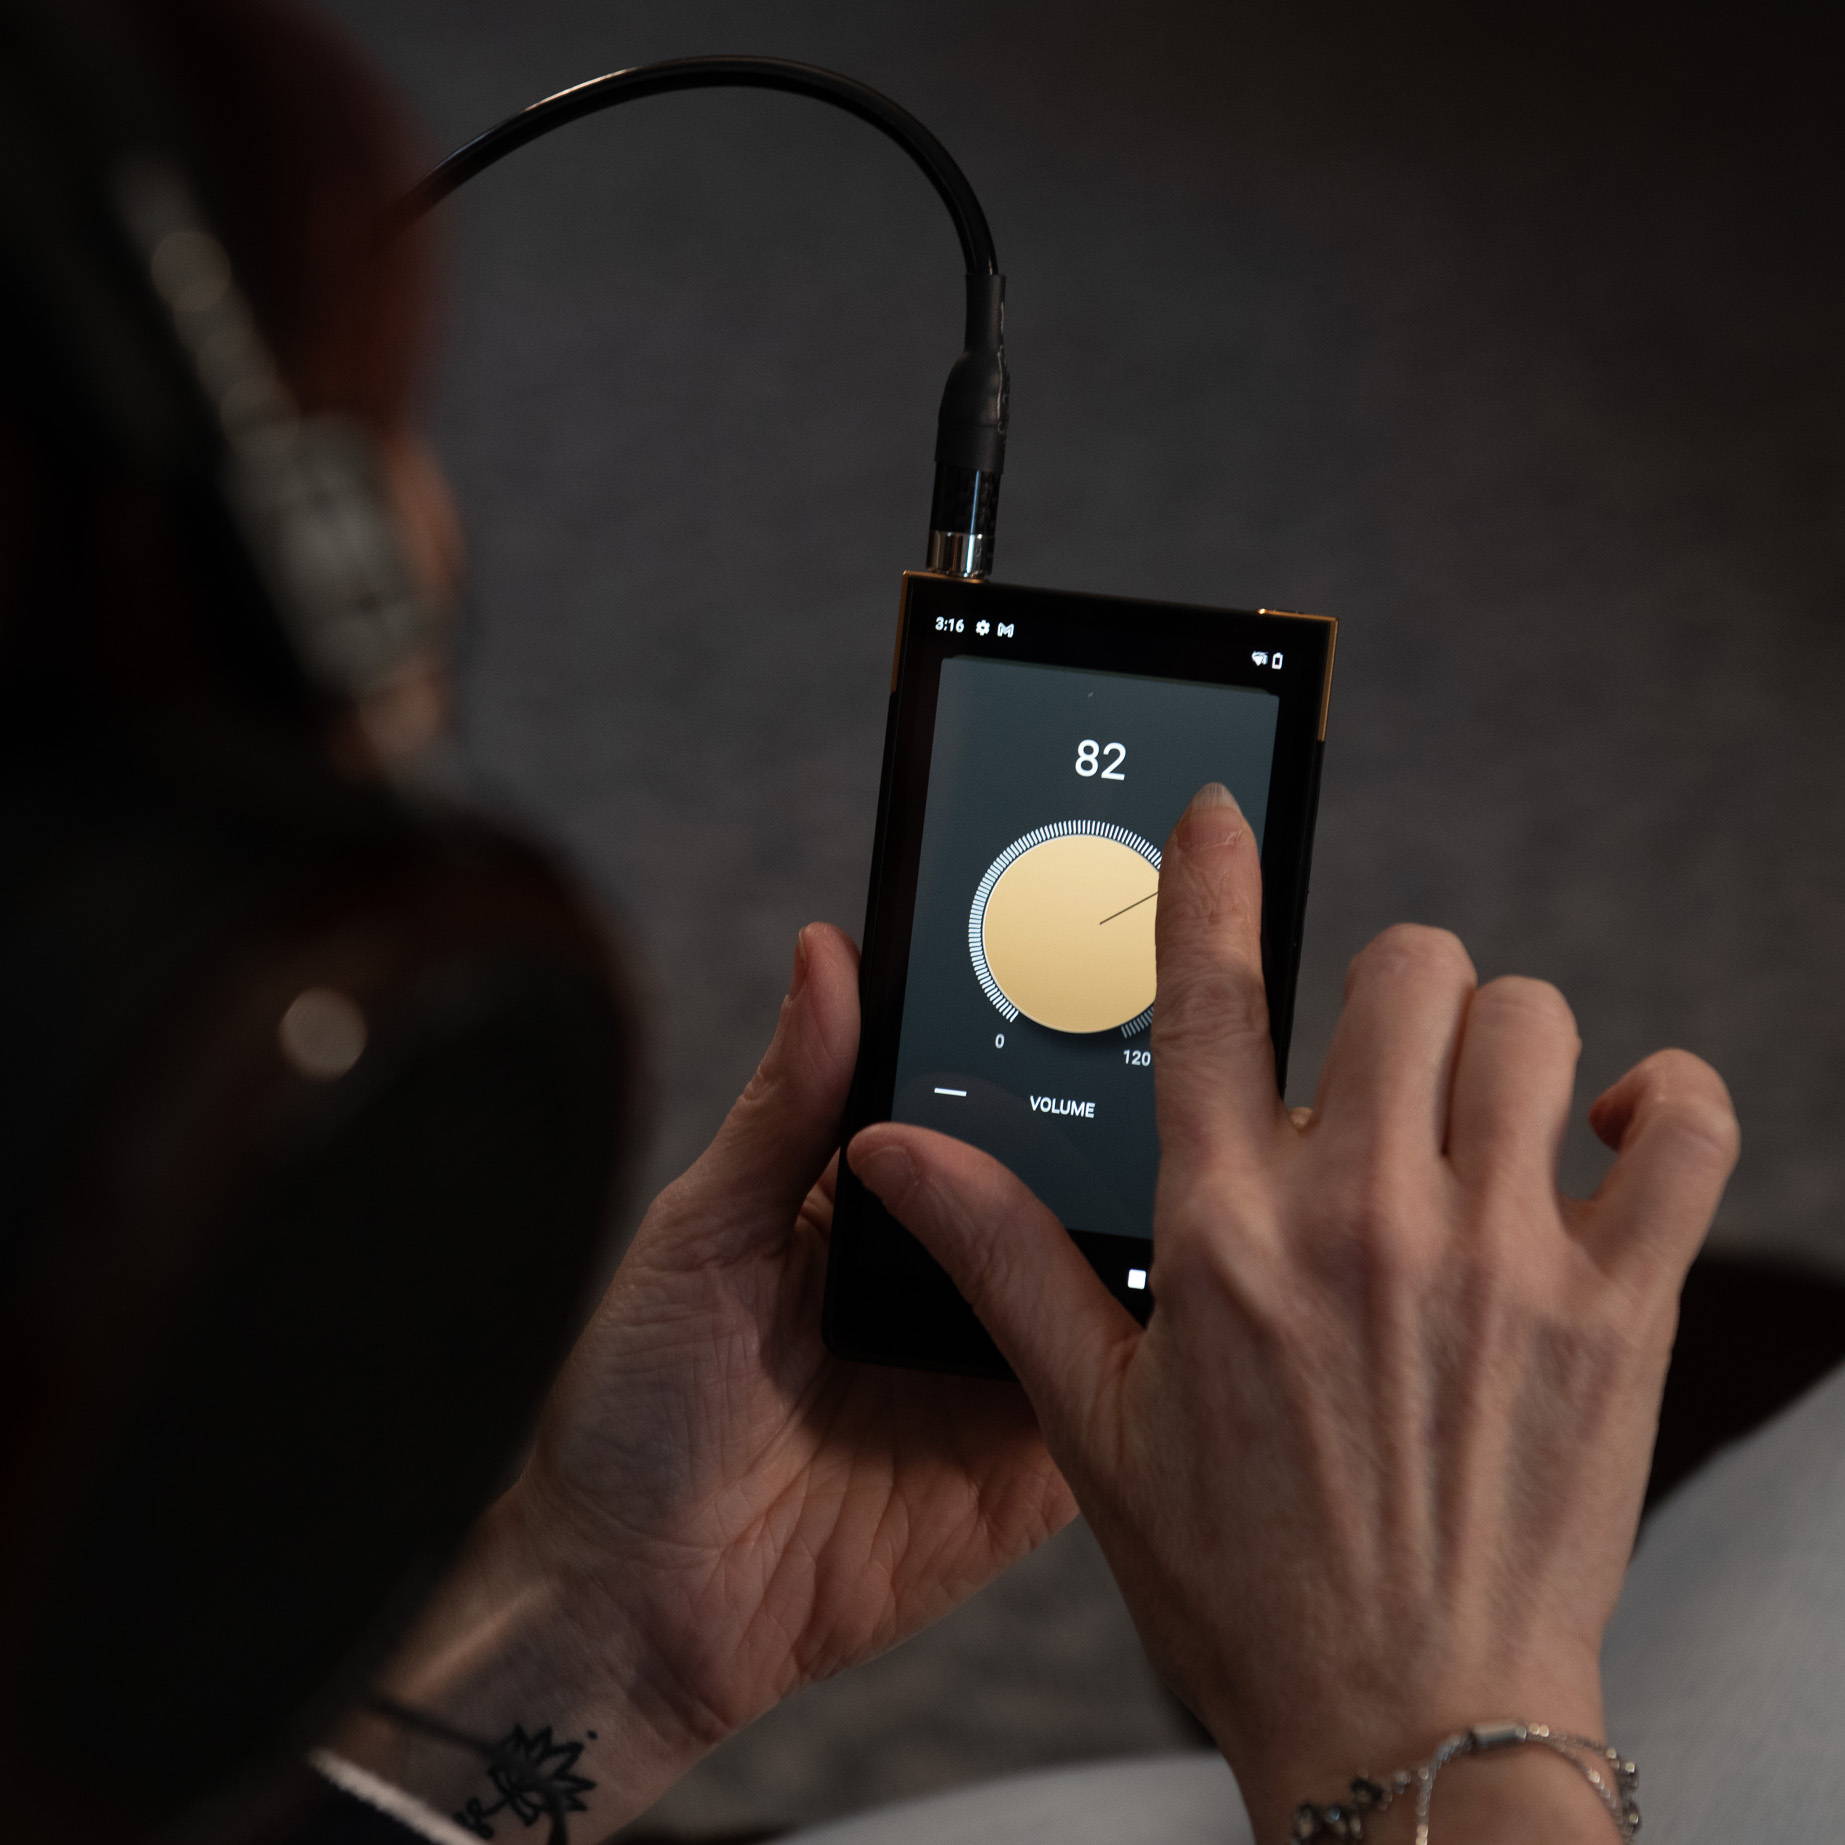 Sony NW-ZX707 Walkman Music Player Review - Moon Audio